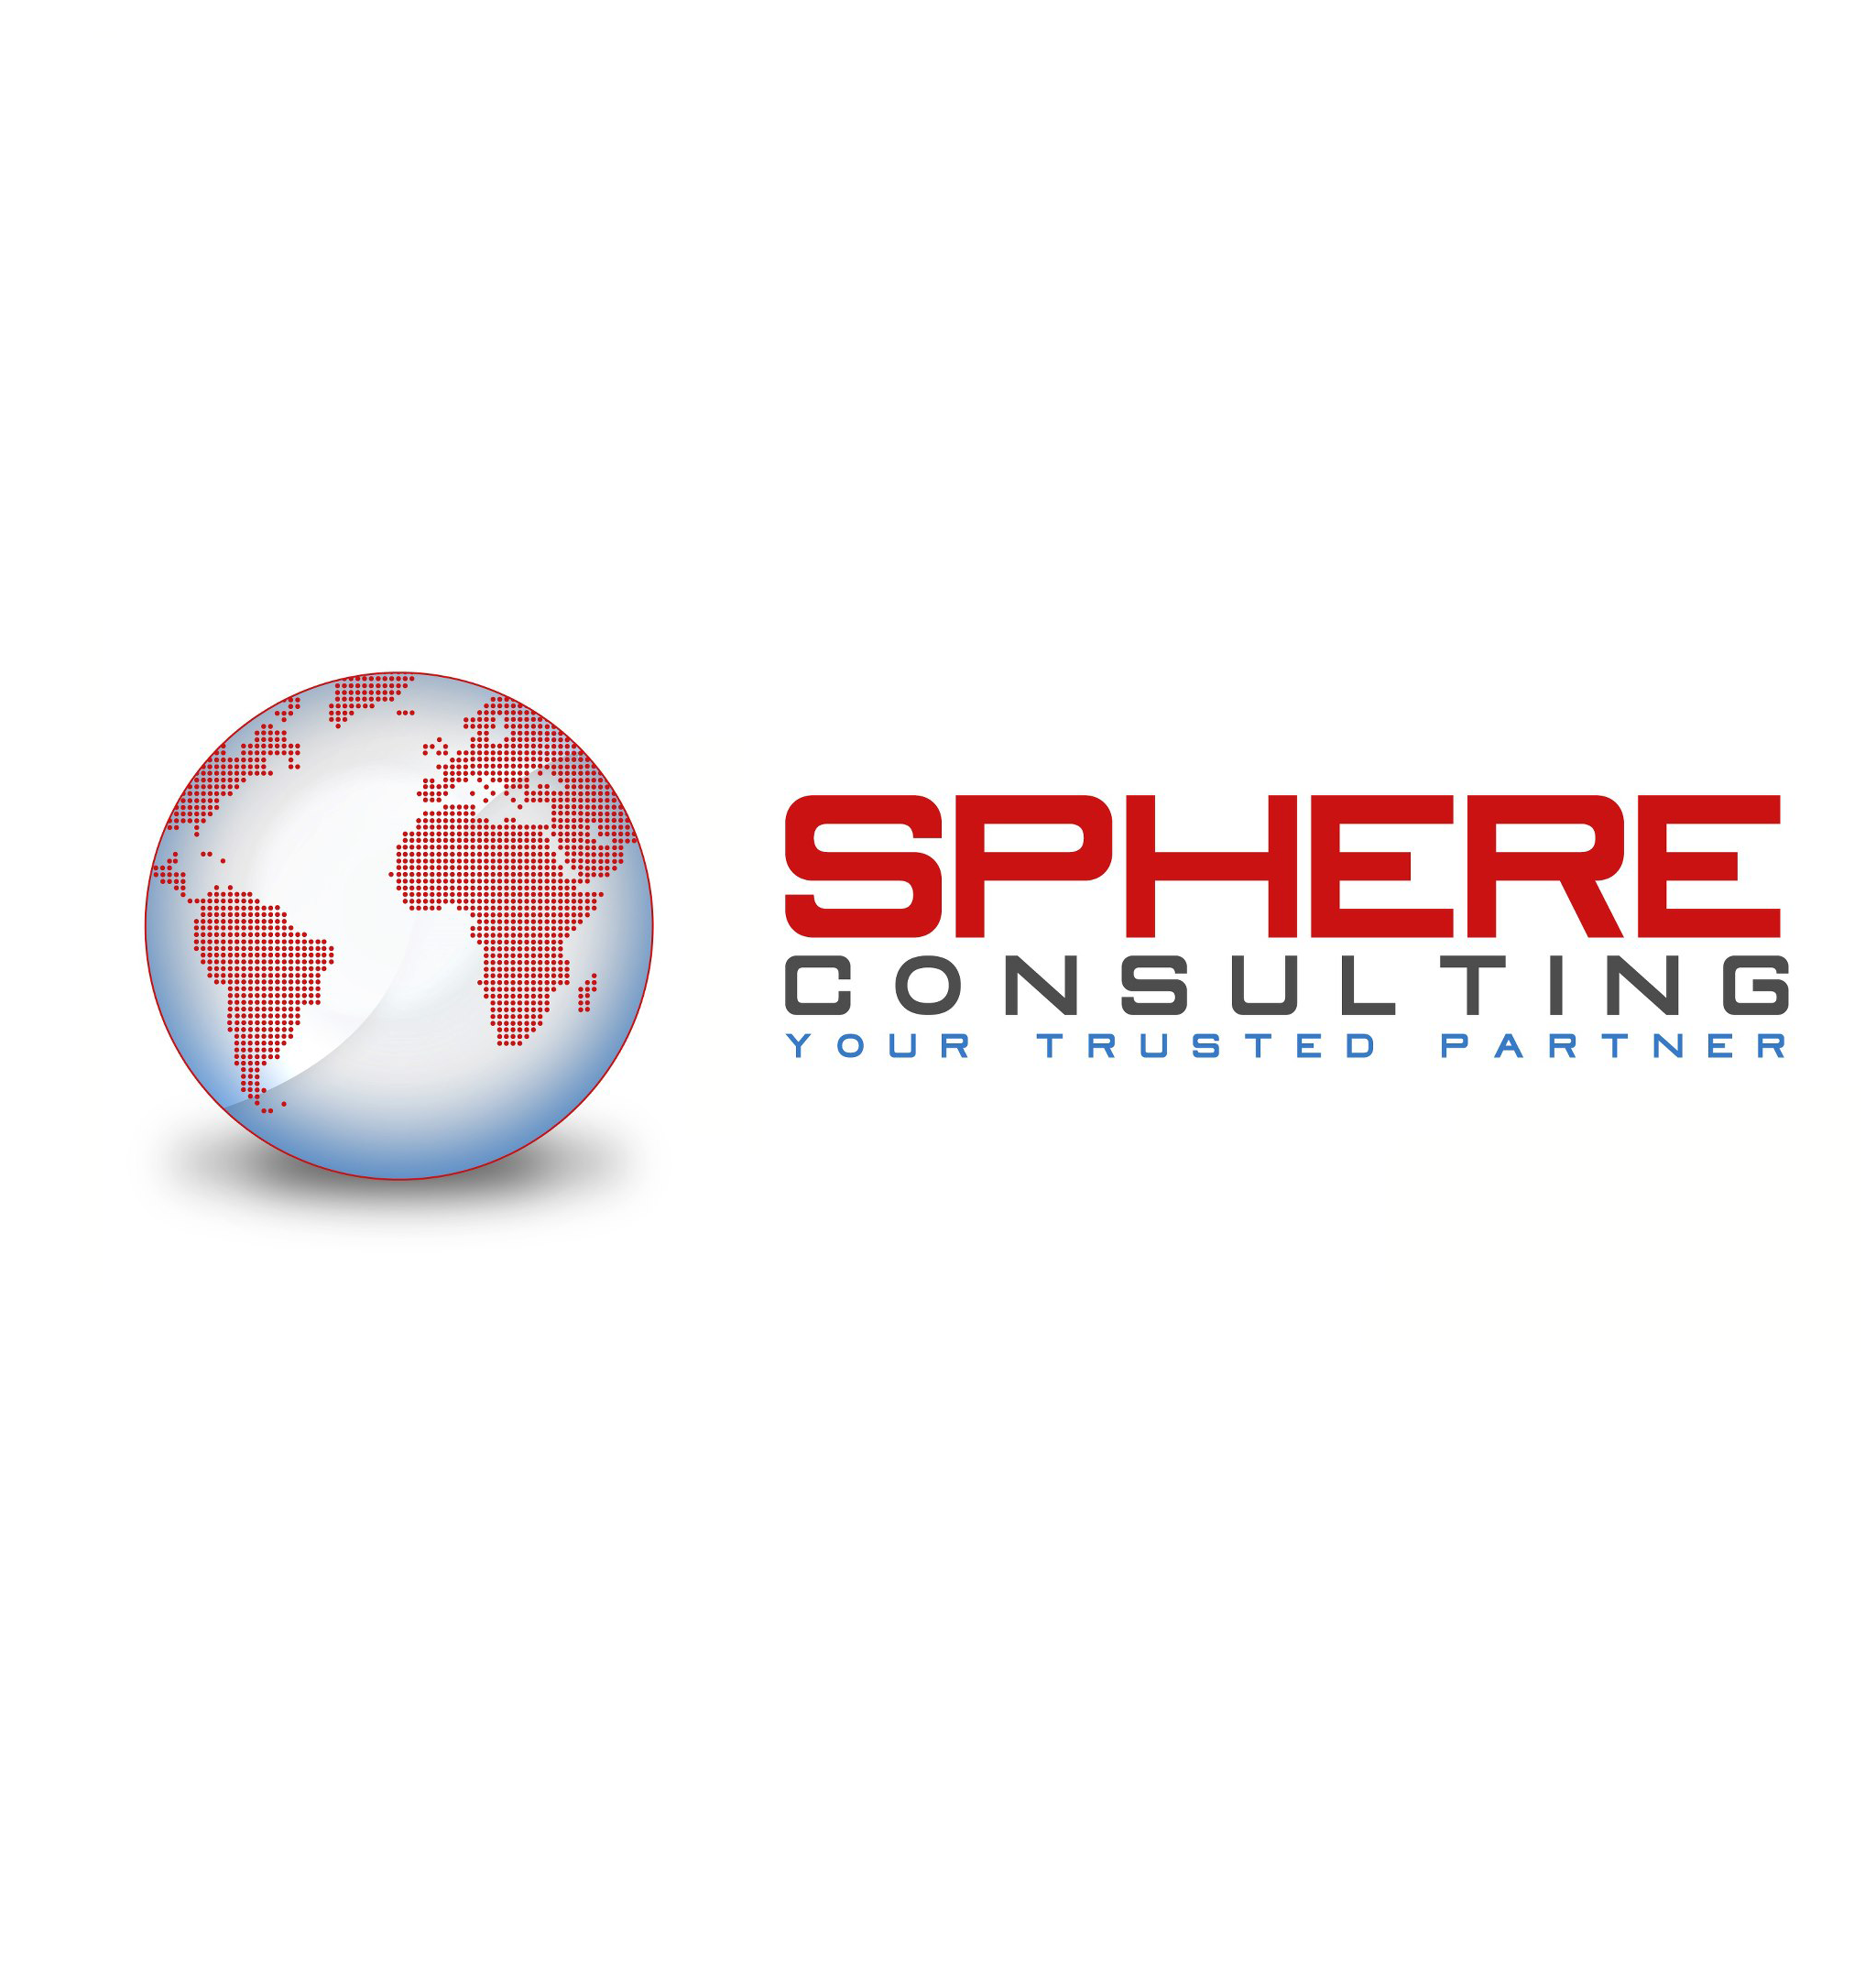 Sphere consulting